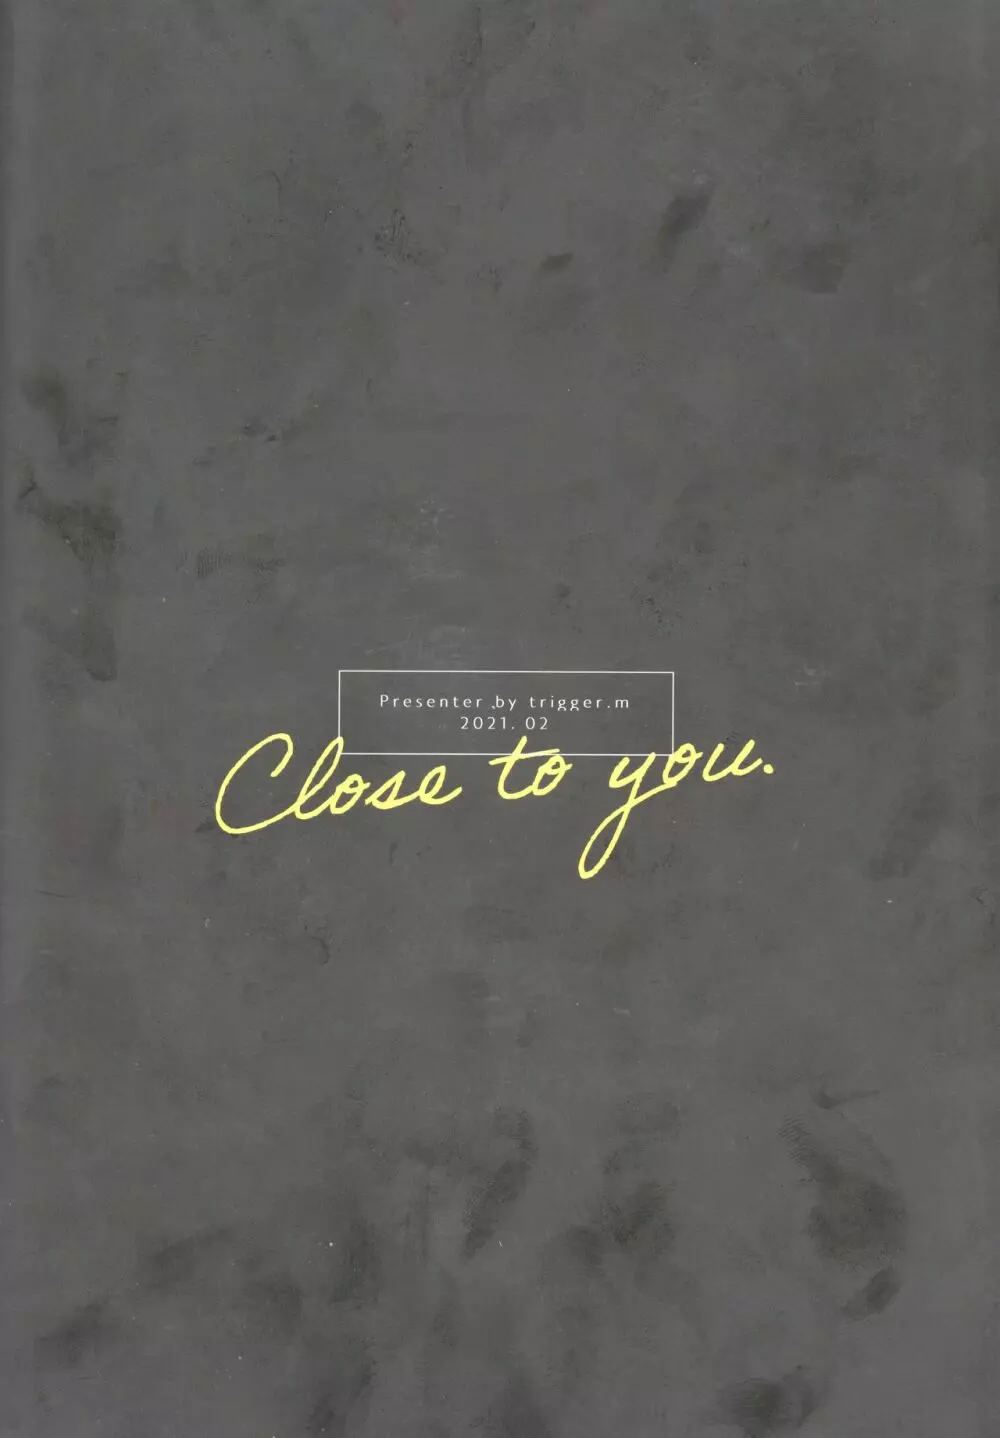 Close to you. - page45